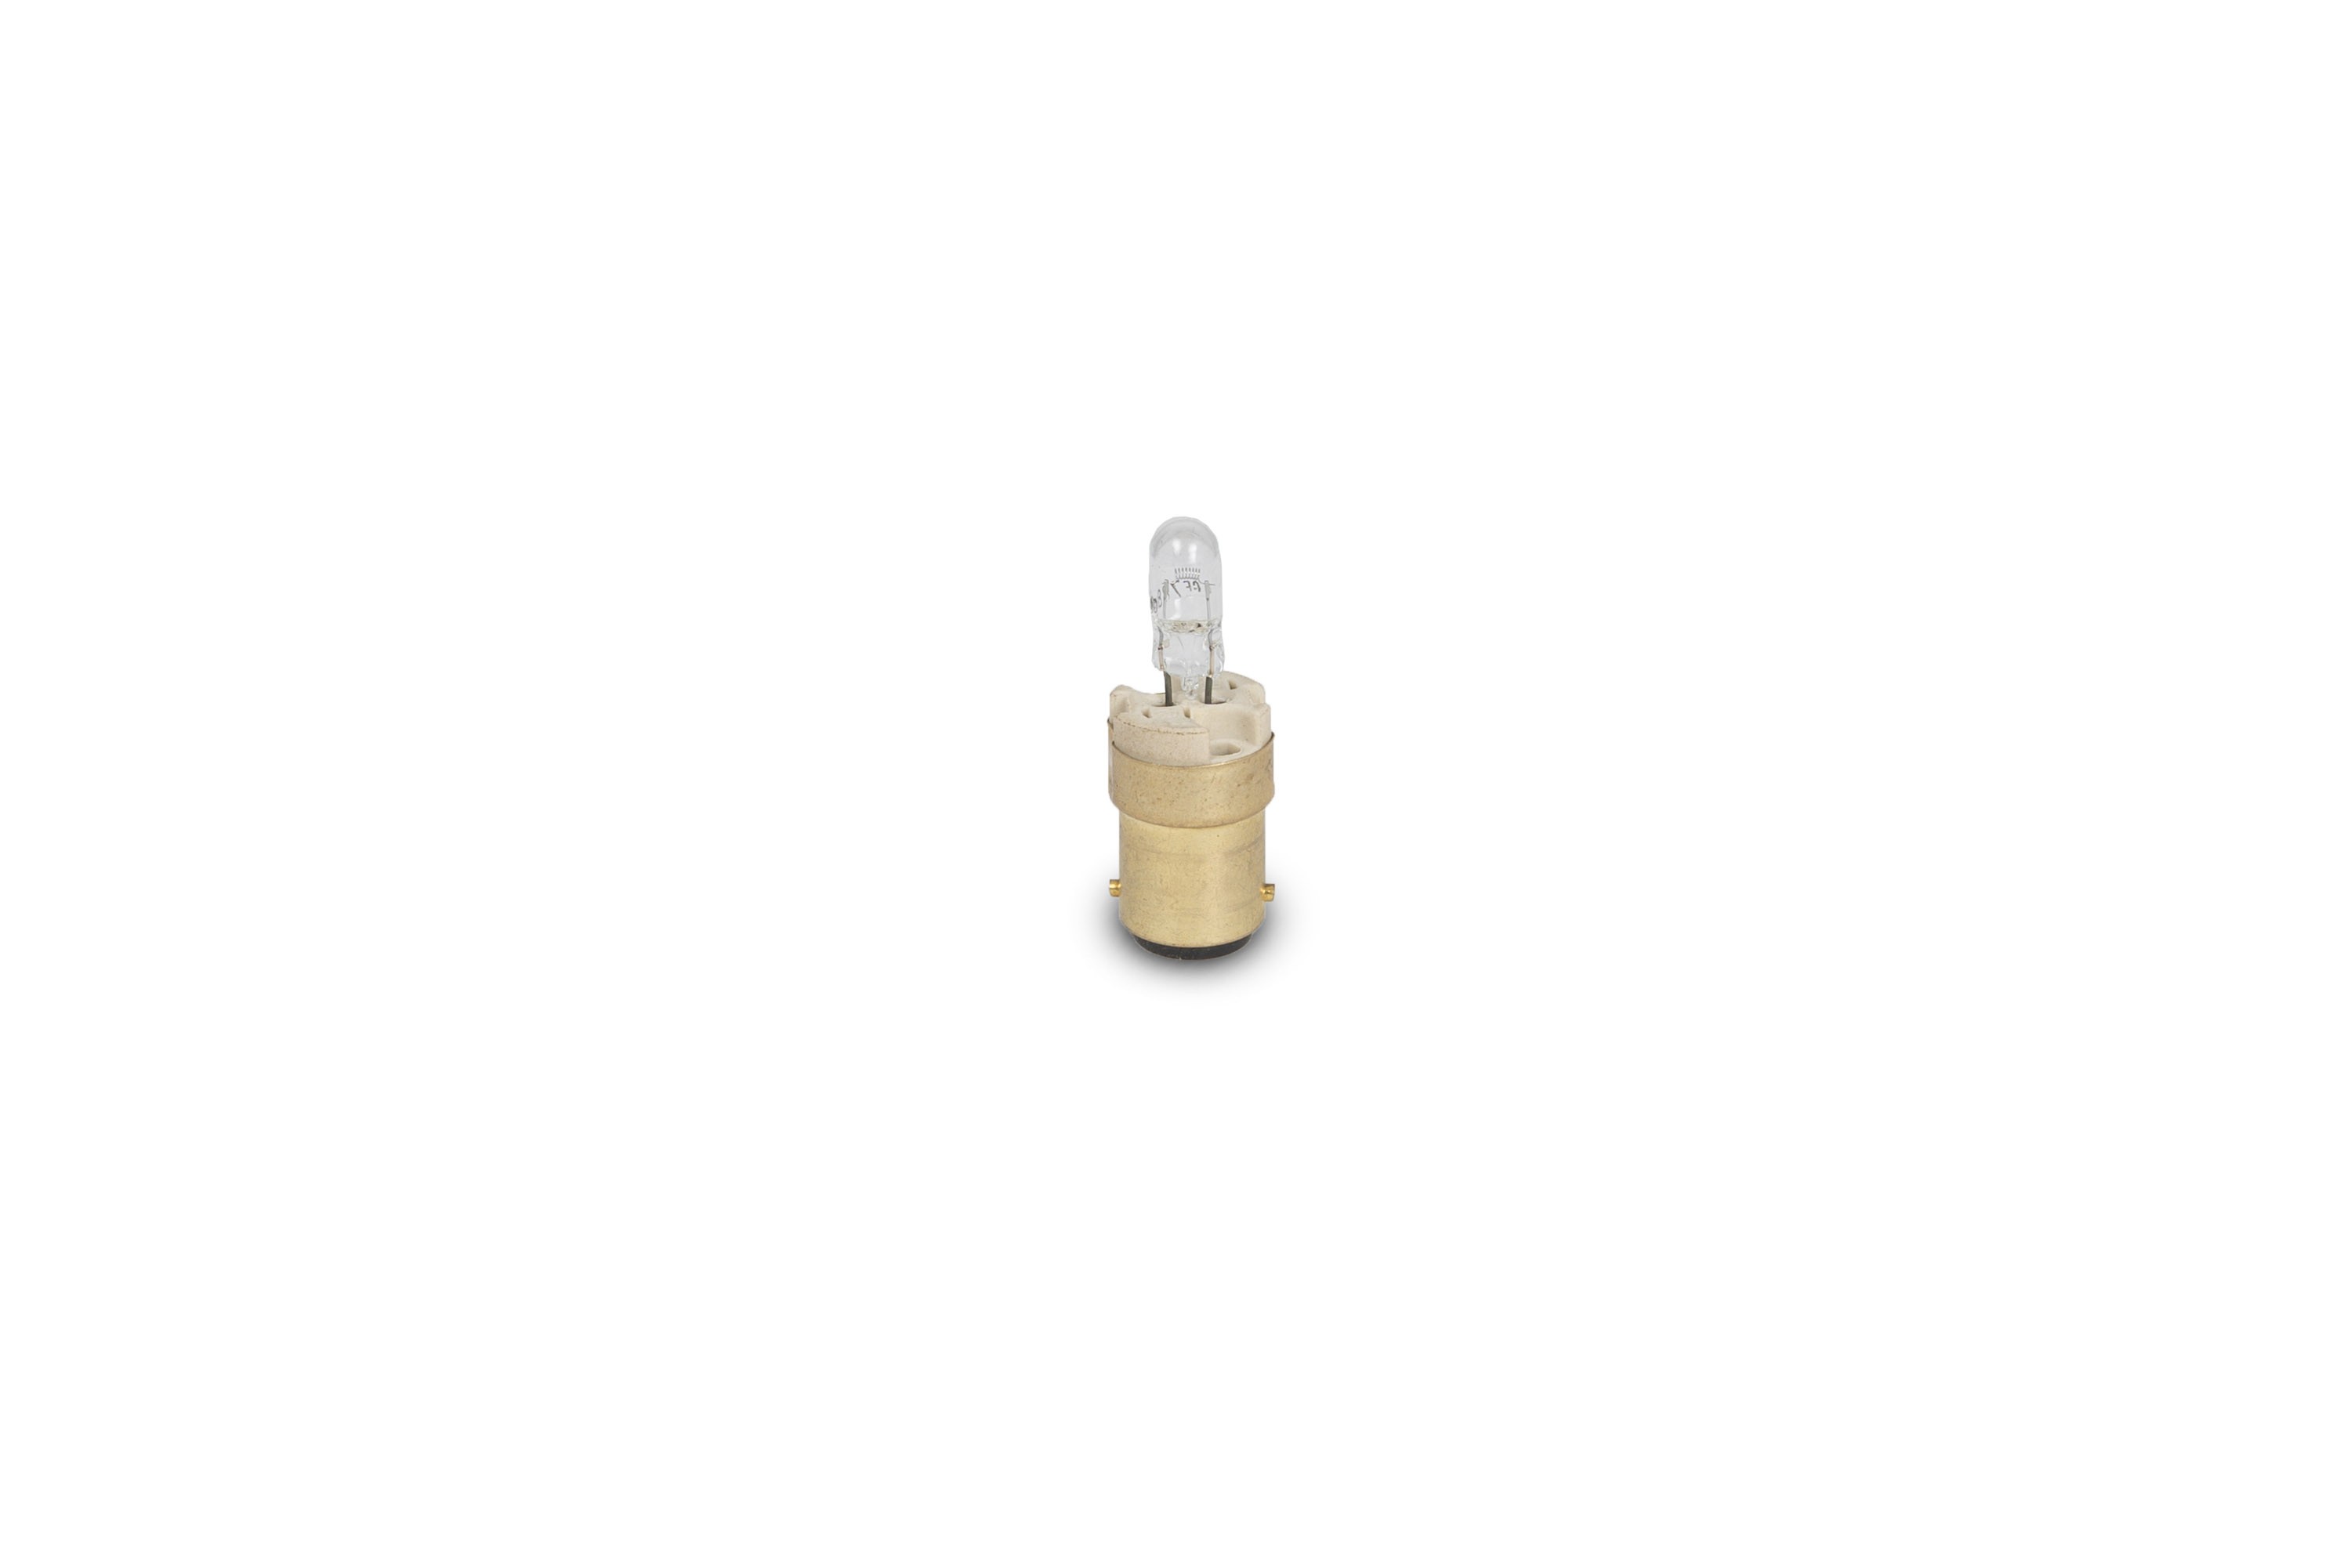 Replacement bulb (halogen) with ceramic holder